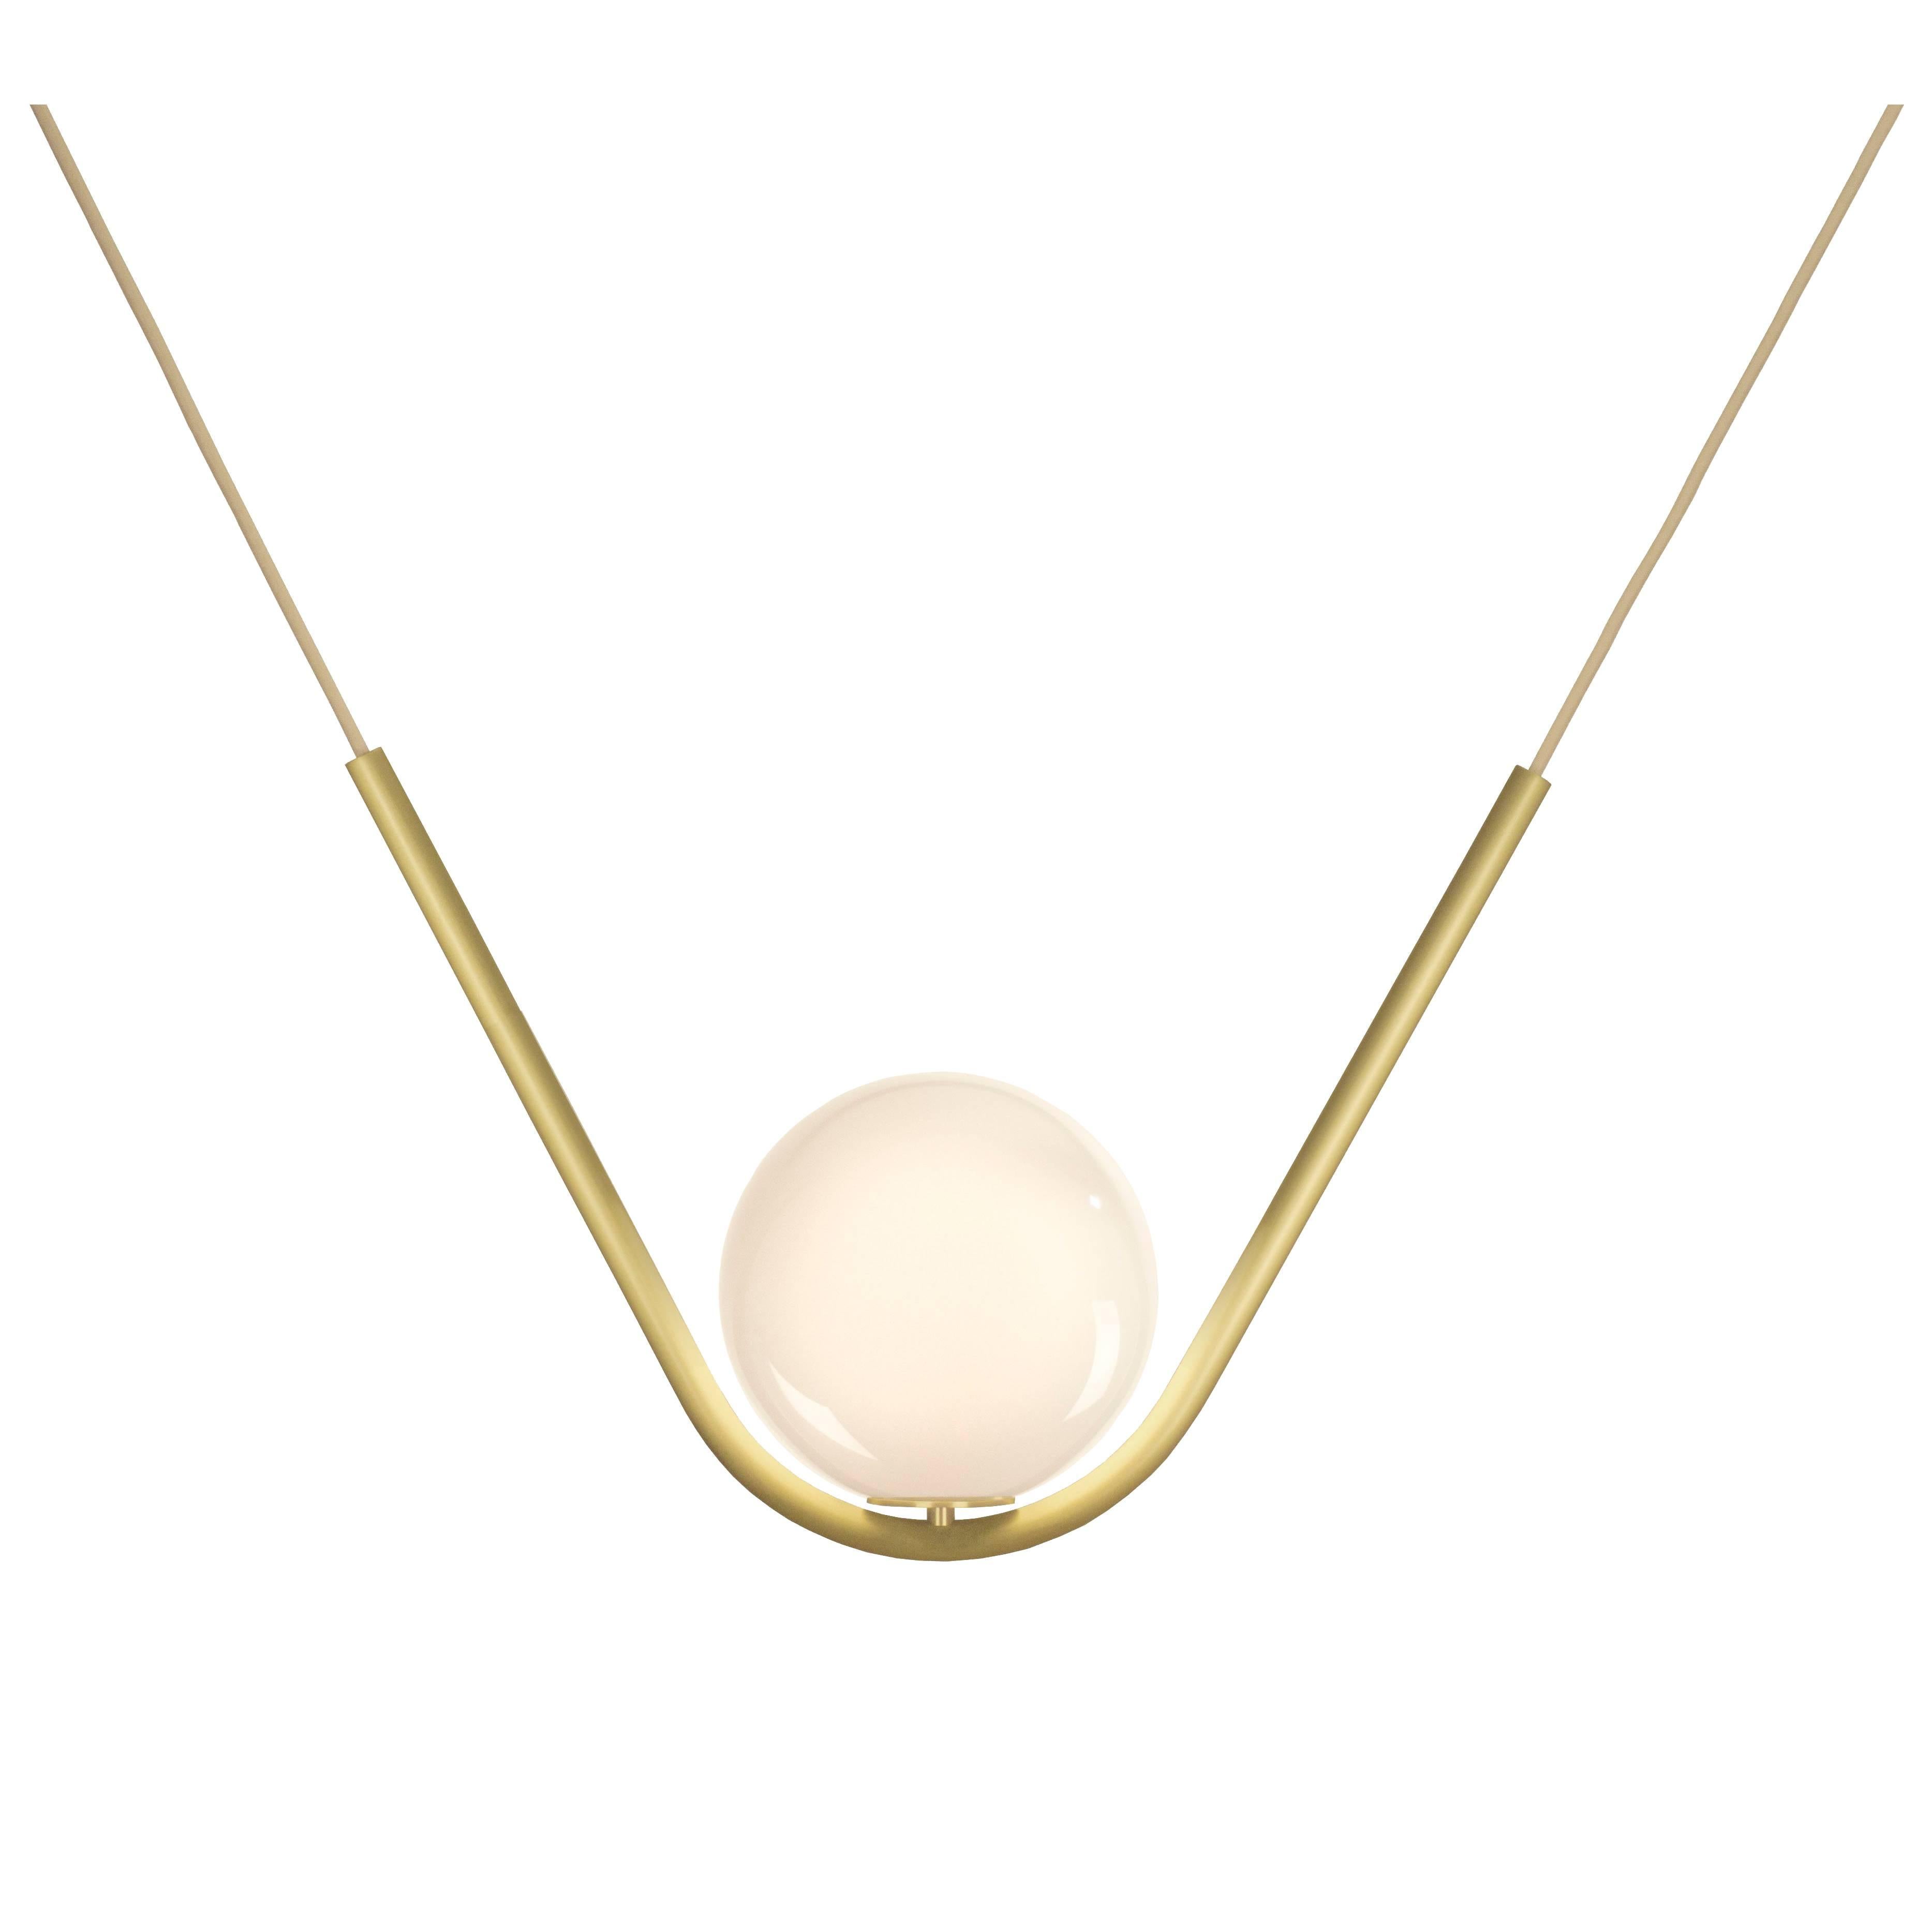 Perle 1 Pendant in Aged Brass with Handblown Glass Ball by Larose Guyon For Sale